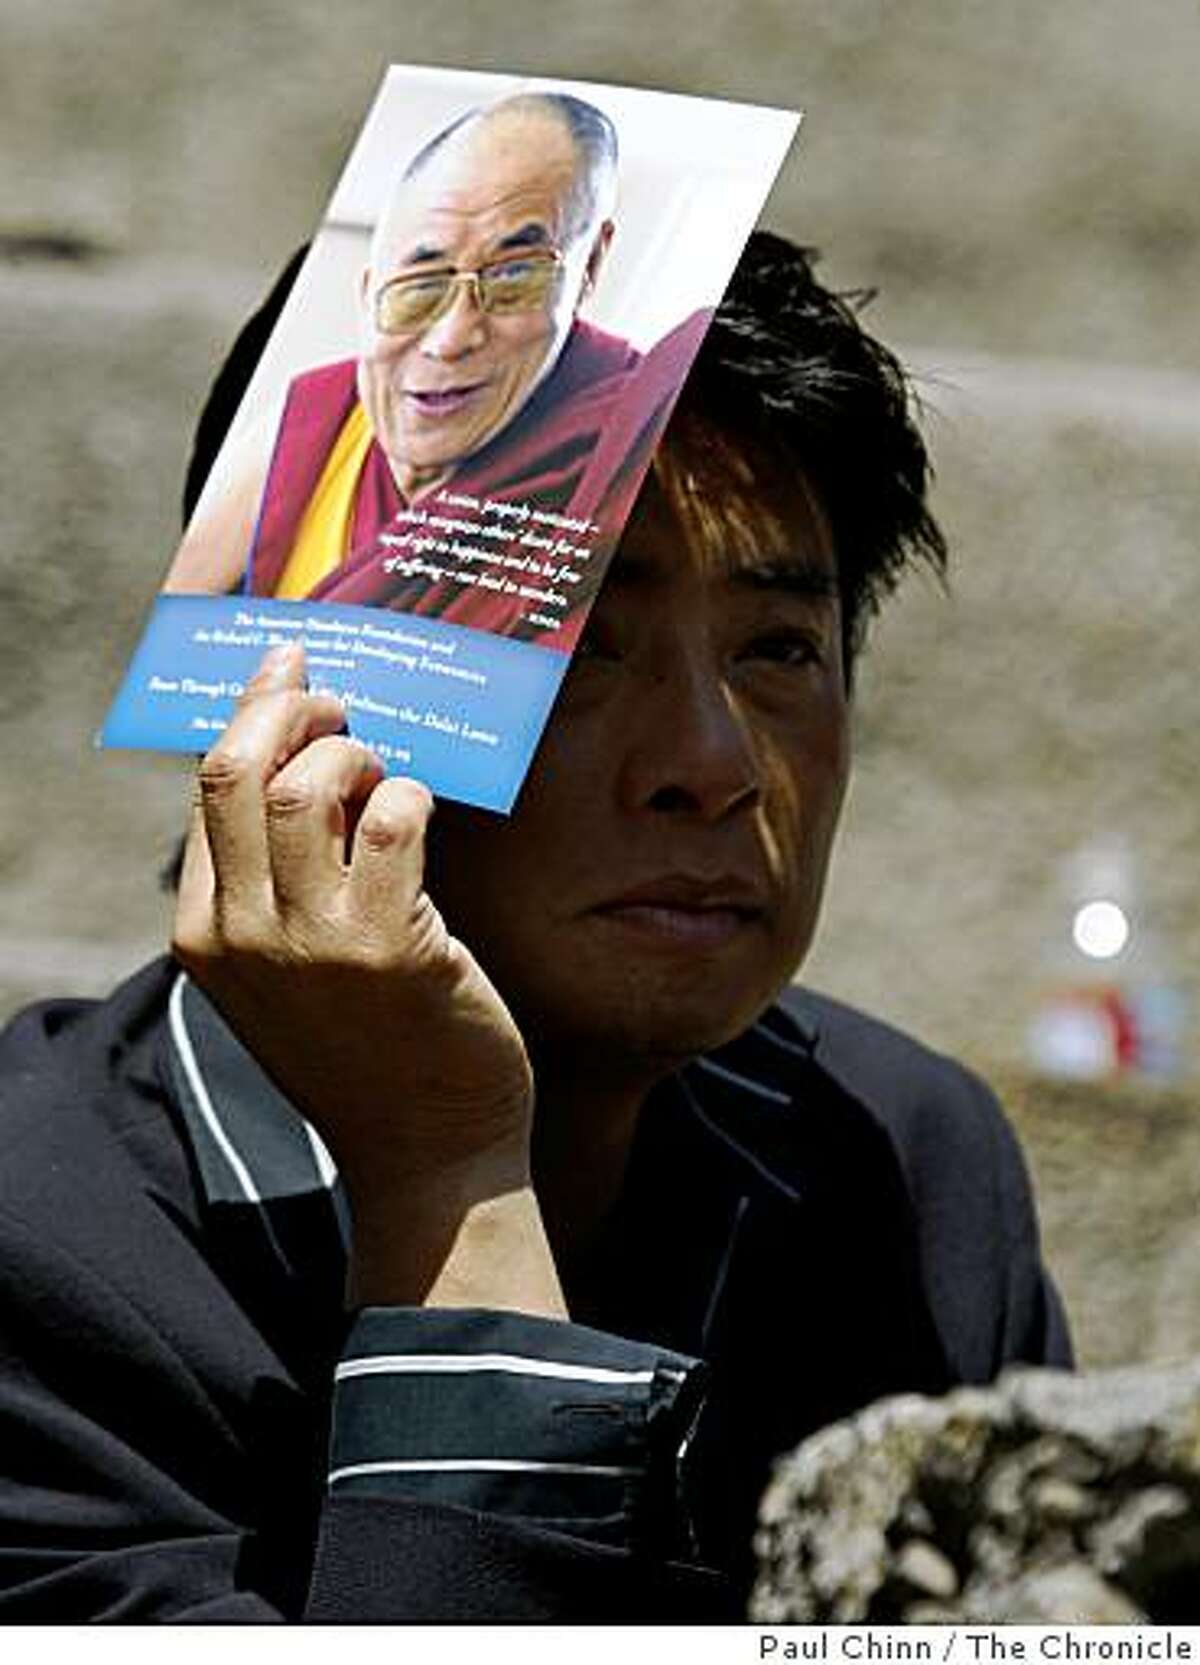 Pema Randul shields his face from the sun while waiting to hear the Dalai Lama speak about "Peace Through Compassion" at the Greek Theatre in Berkeley, Calif., on Saturday, April 25, 2009.